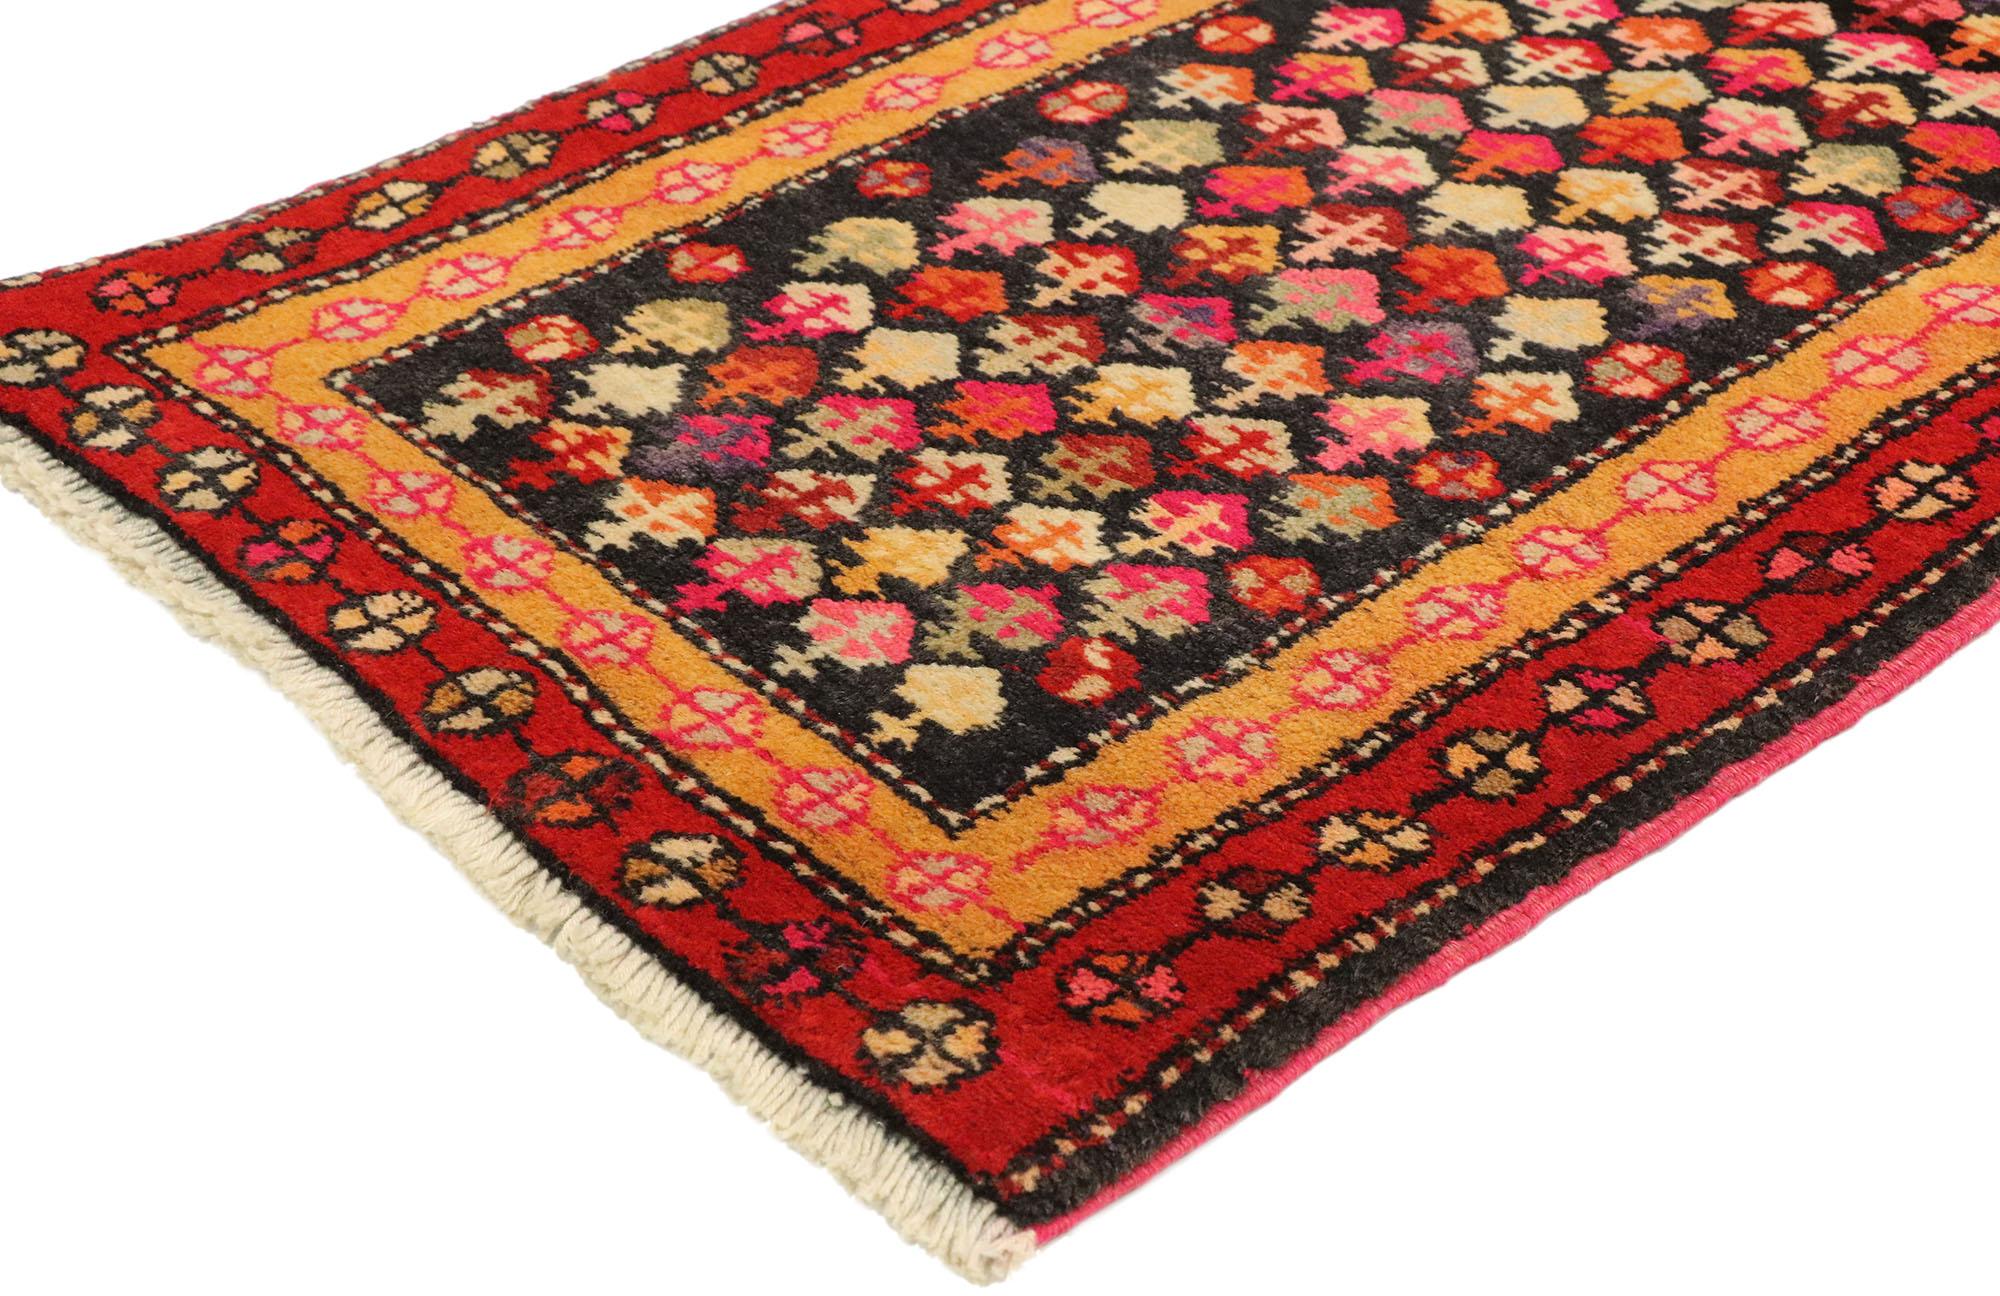 76132, vintage Persian Hamadan accent rug with tribal style. Bright and dynamic, this hand-knotted wool vintage Persian Hamadan accent rug with tribal style features a multi-color all-over Mir-a-Boteh pattern on a dark field surrounded by two